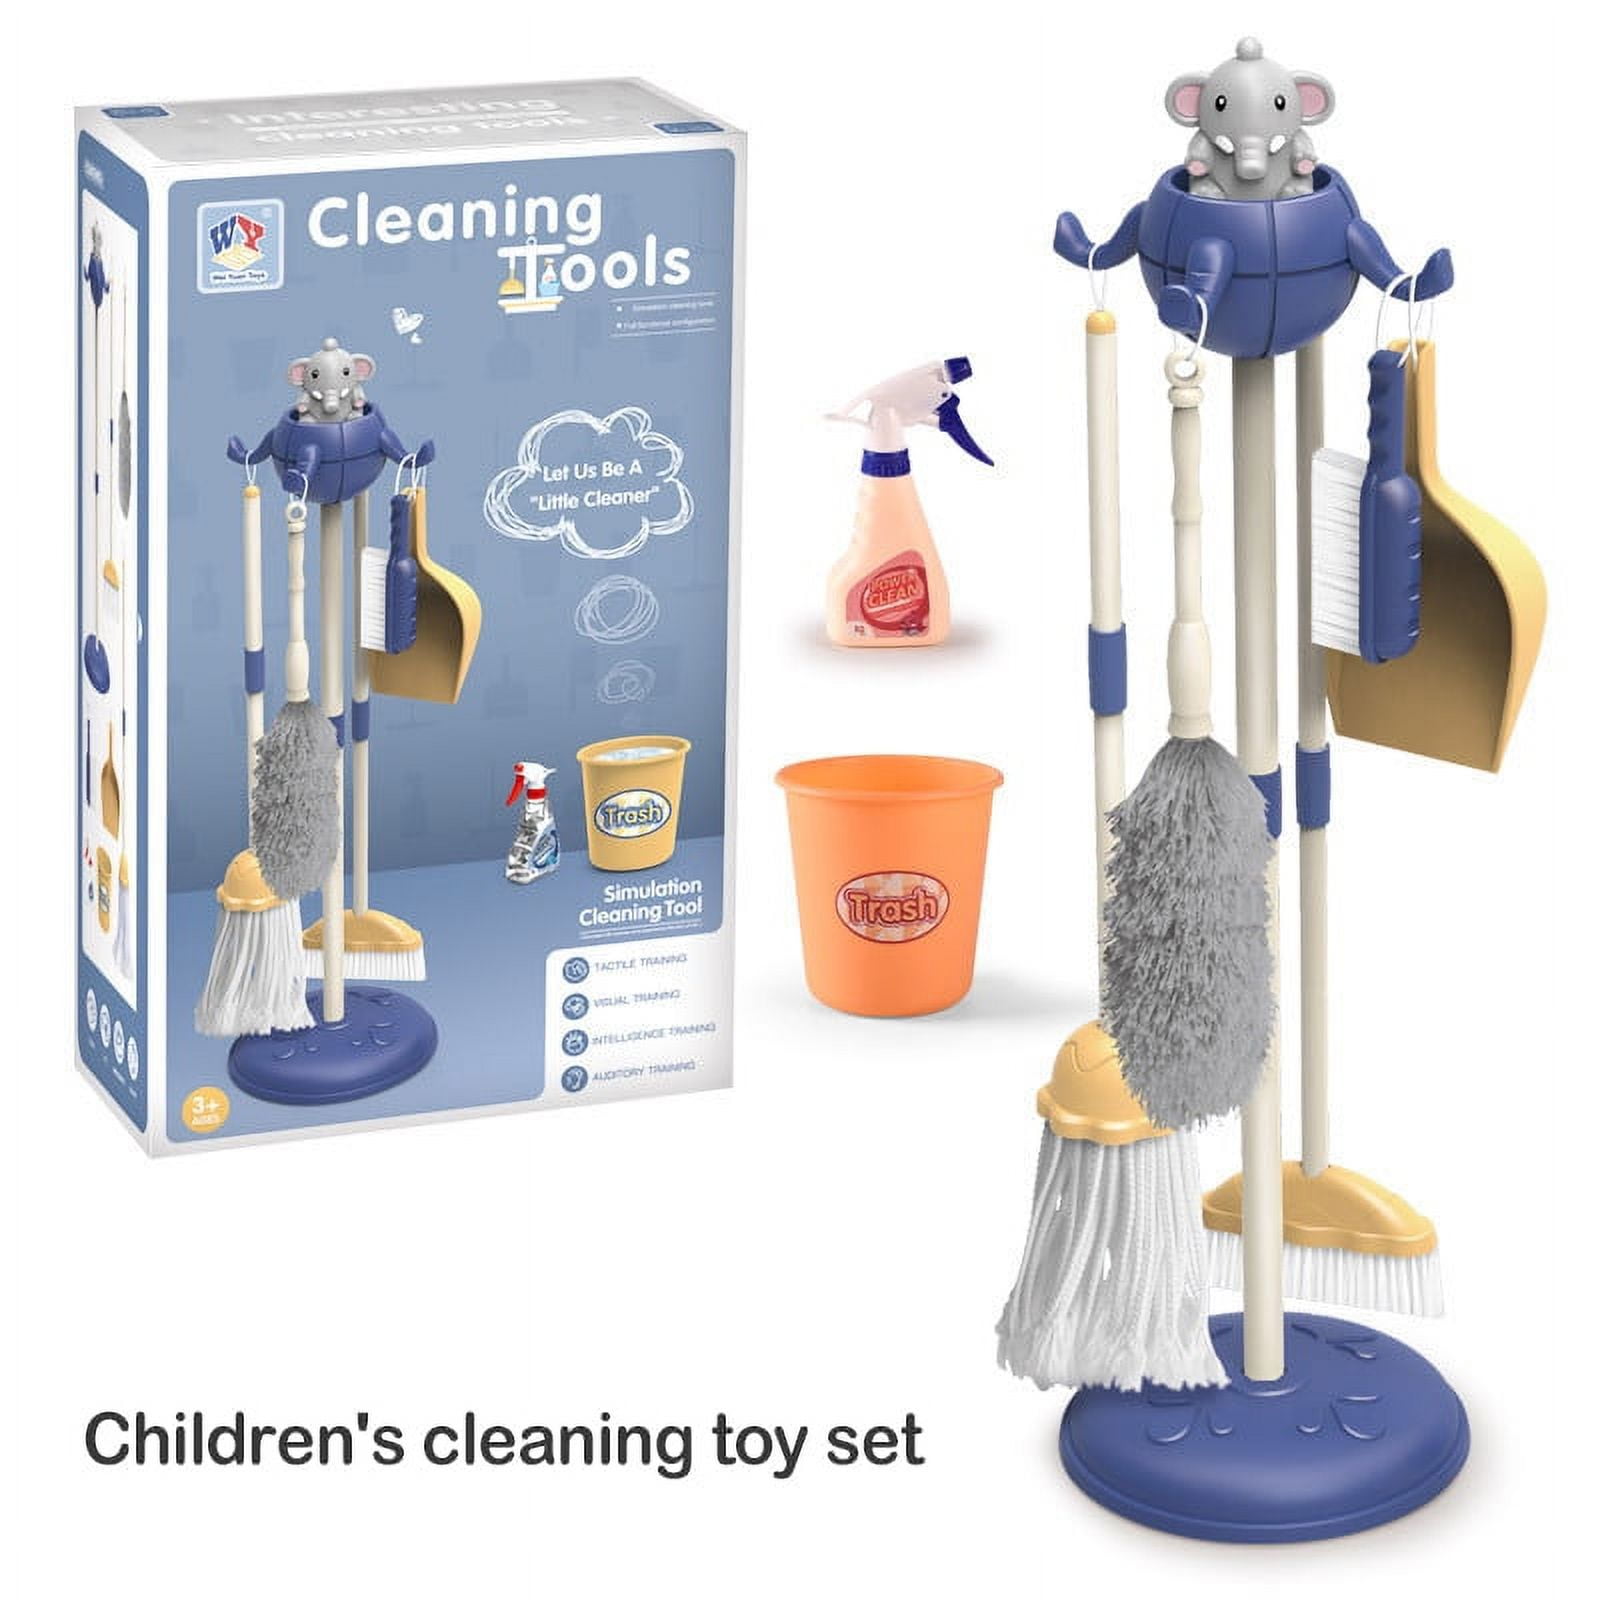 Kids Cleaning Set Children's Educational Simulation Play House Toy  Housekeeping Cleaning Toys Broom Mop Duster Dustpan Brushes - AliExpress